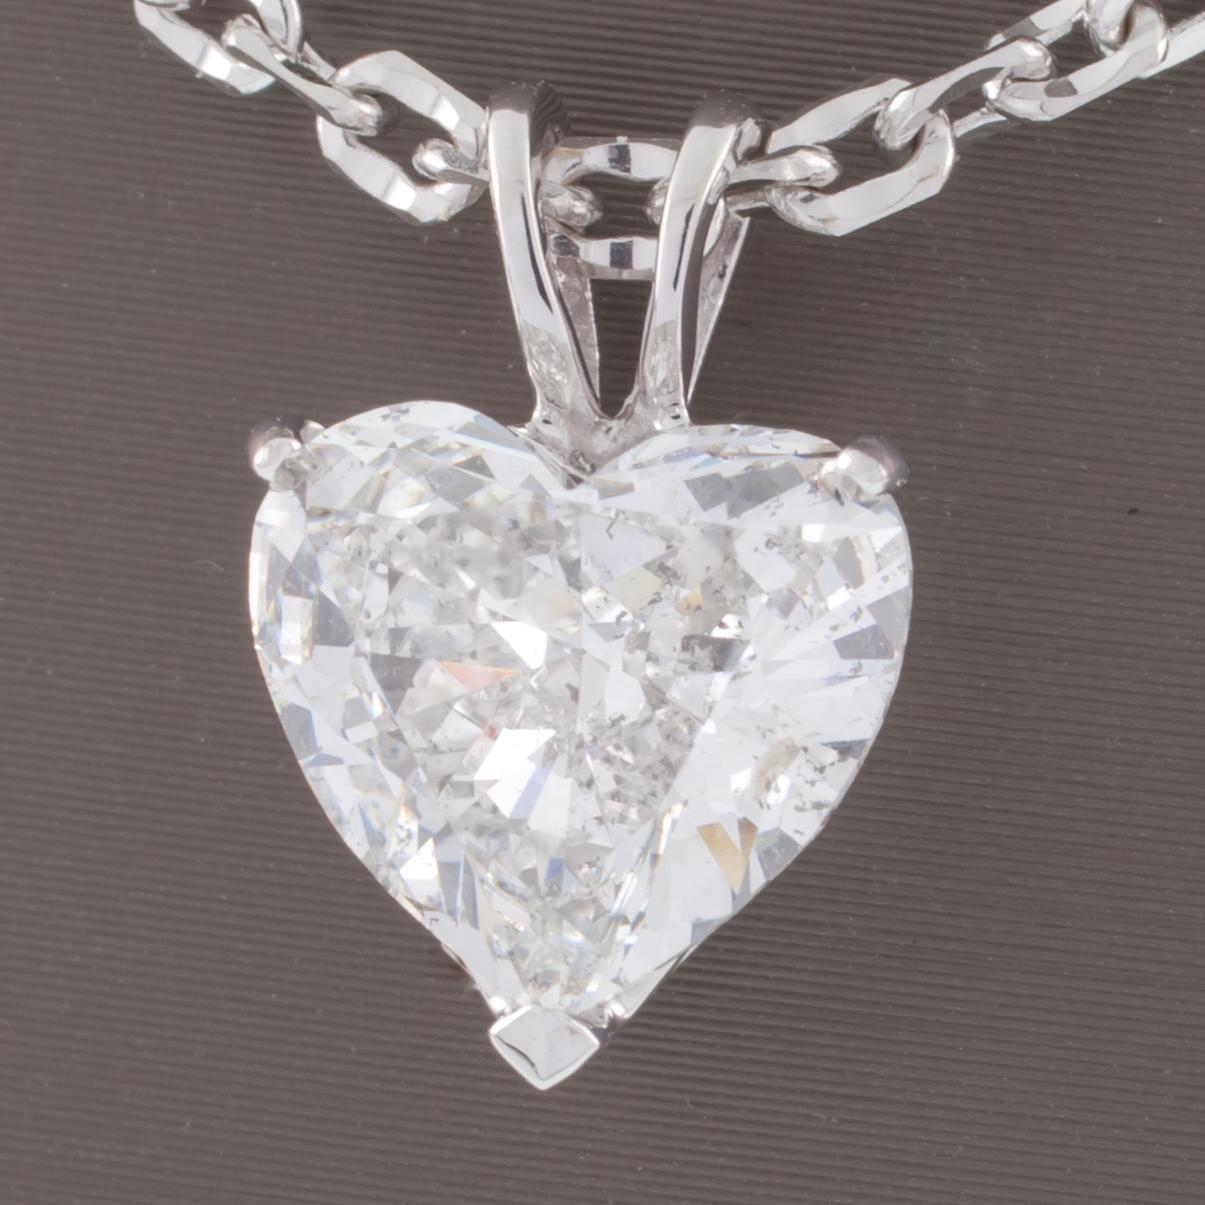 Modern 2.41 Carat Heart Shaped Diamond Solitaire Pendant with White Gold Chain